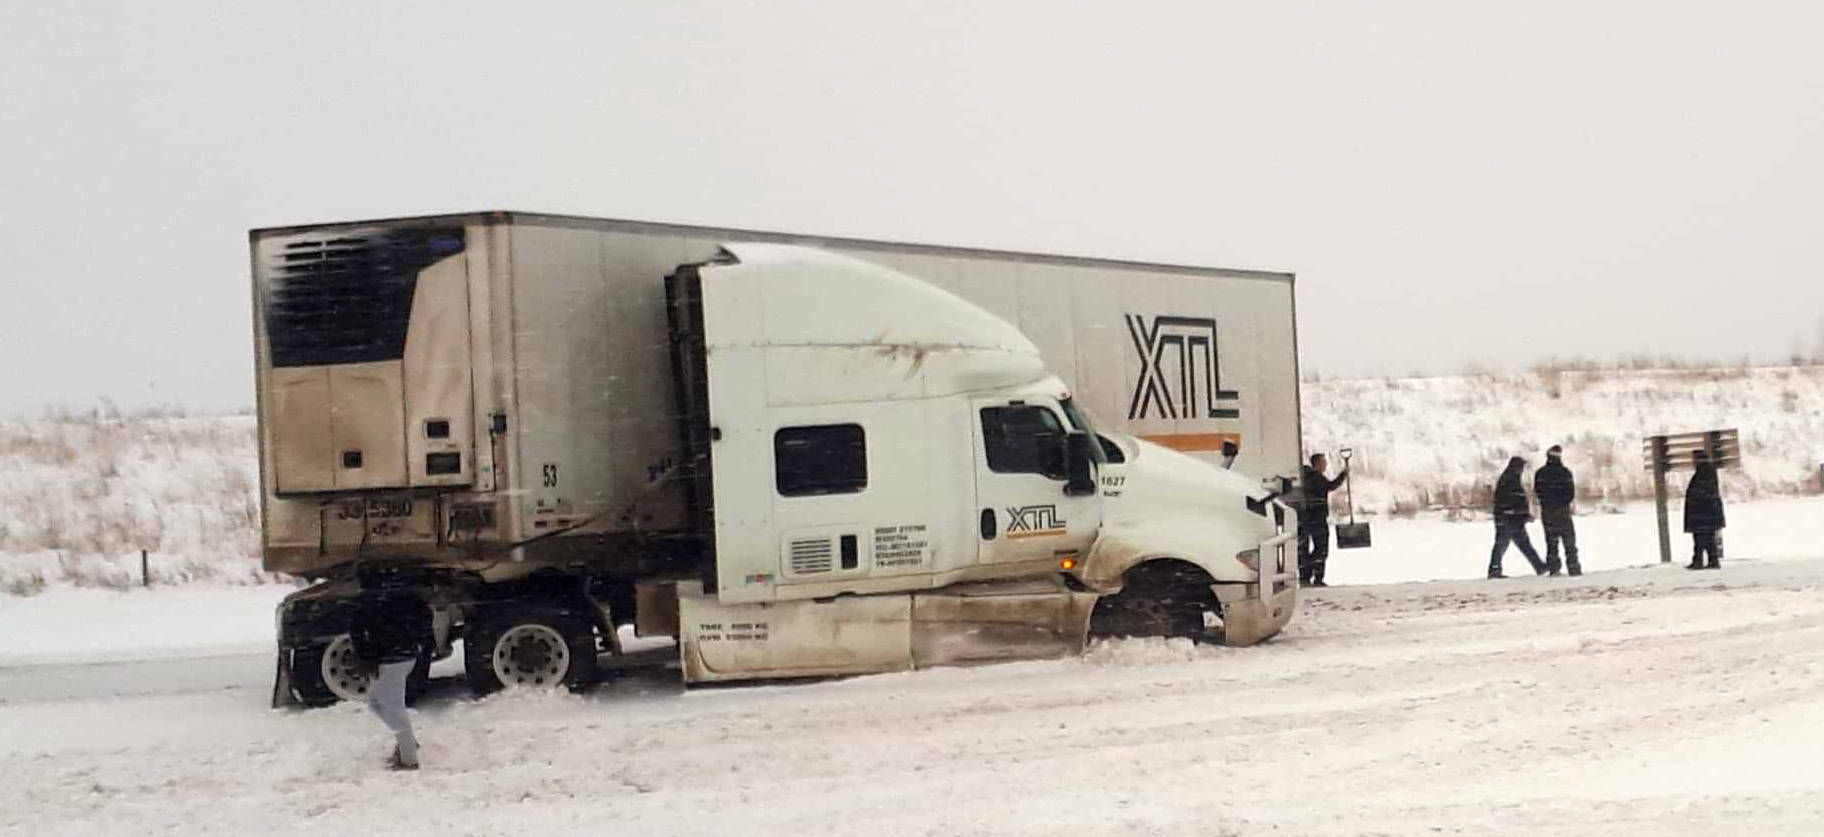 This semi jackknifed, causing 30 vehicles to collide and hit the ditch Dec. 29 near Spruce Grove, which is 11 km northwest of Edmonton. Stony Plain RCMP responded to the collision. Photo by Donnie Cass